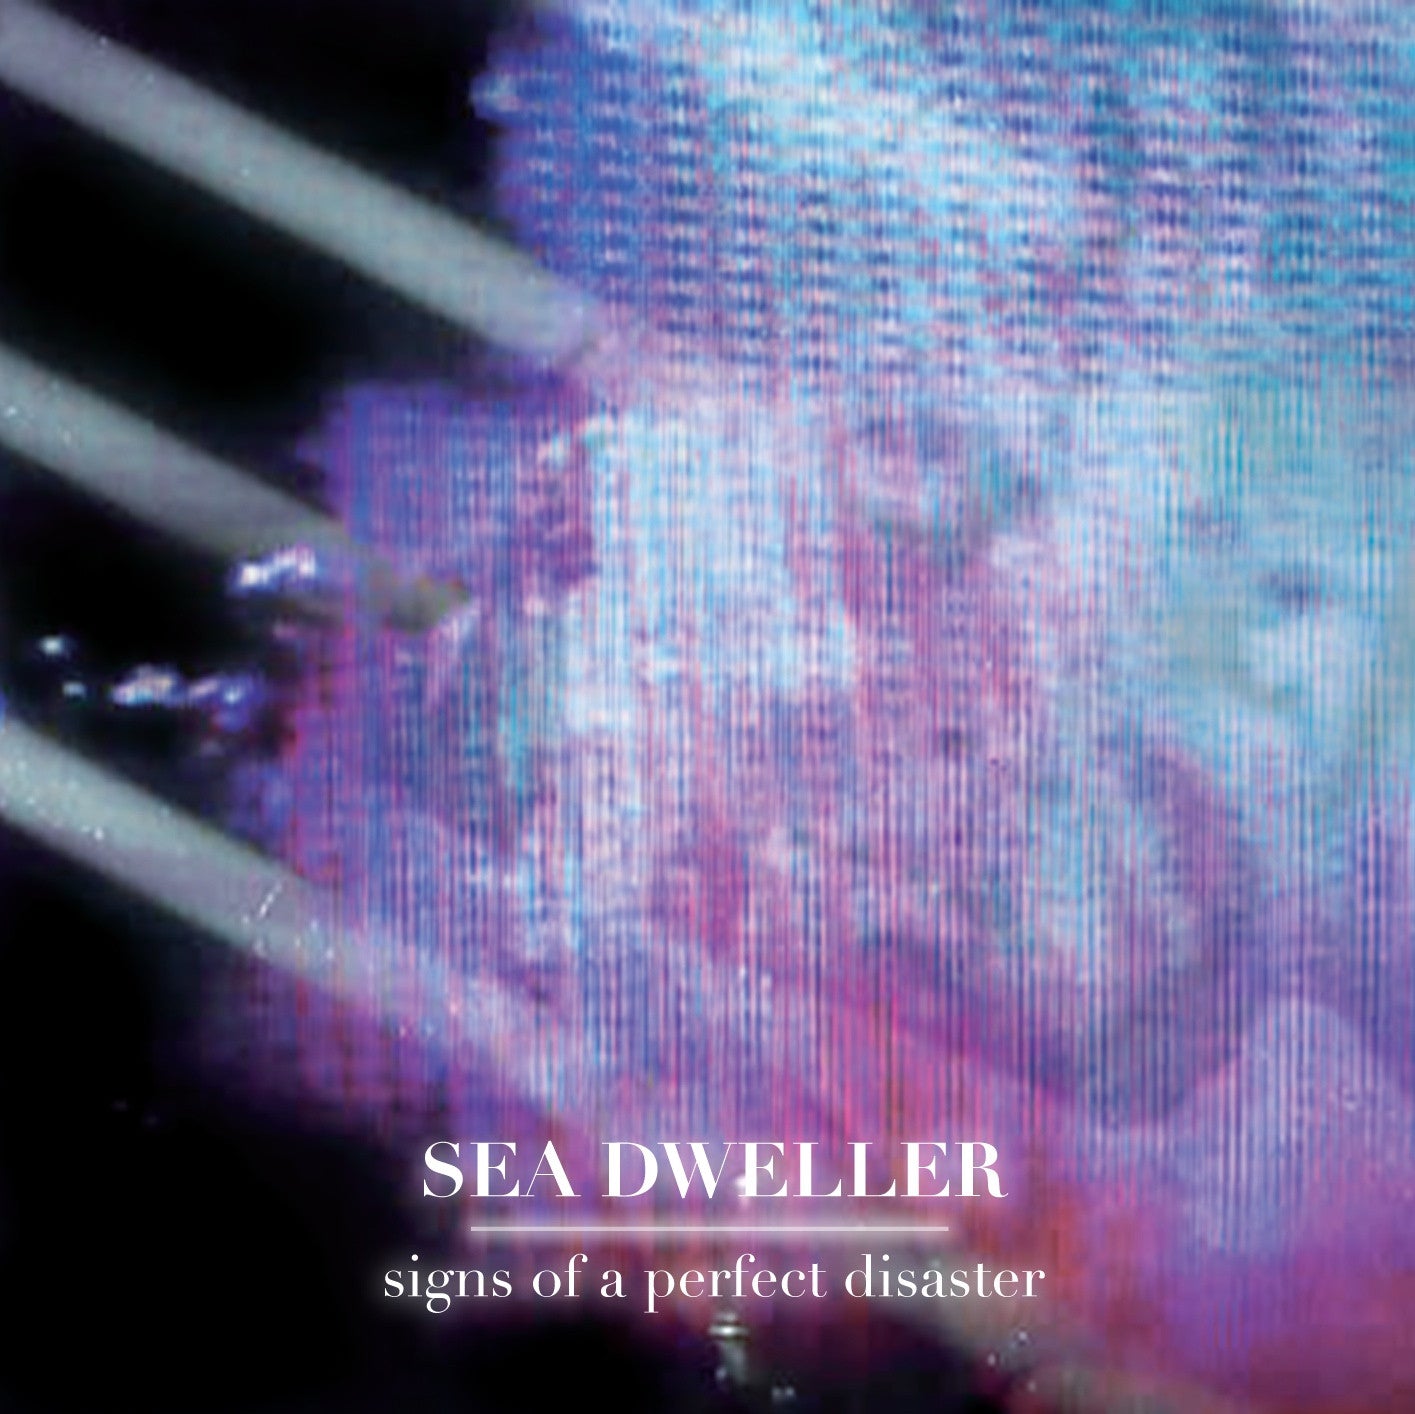 SEA DWELLER - SIGINS OF A PERFECT DISASTER